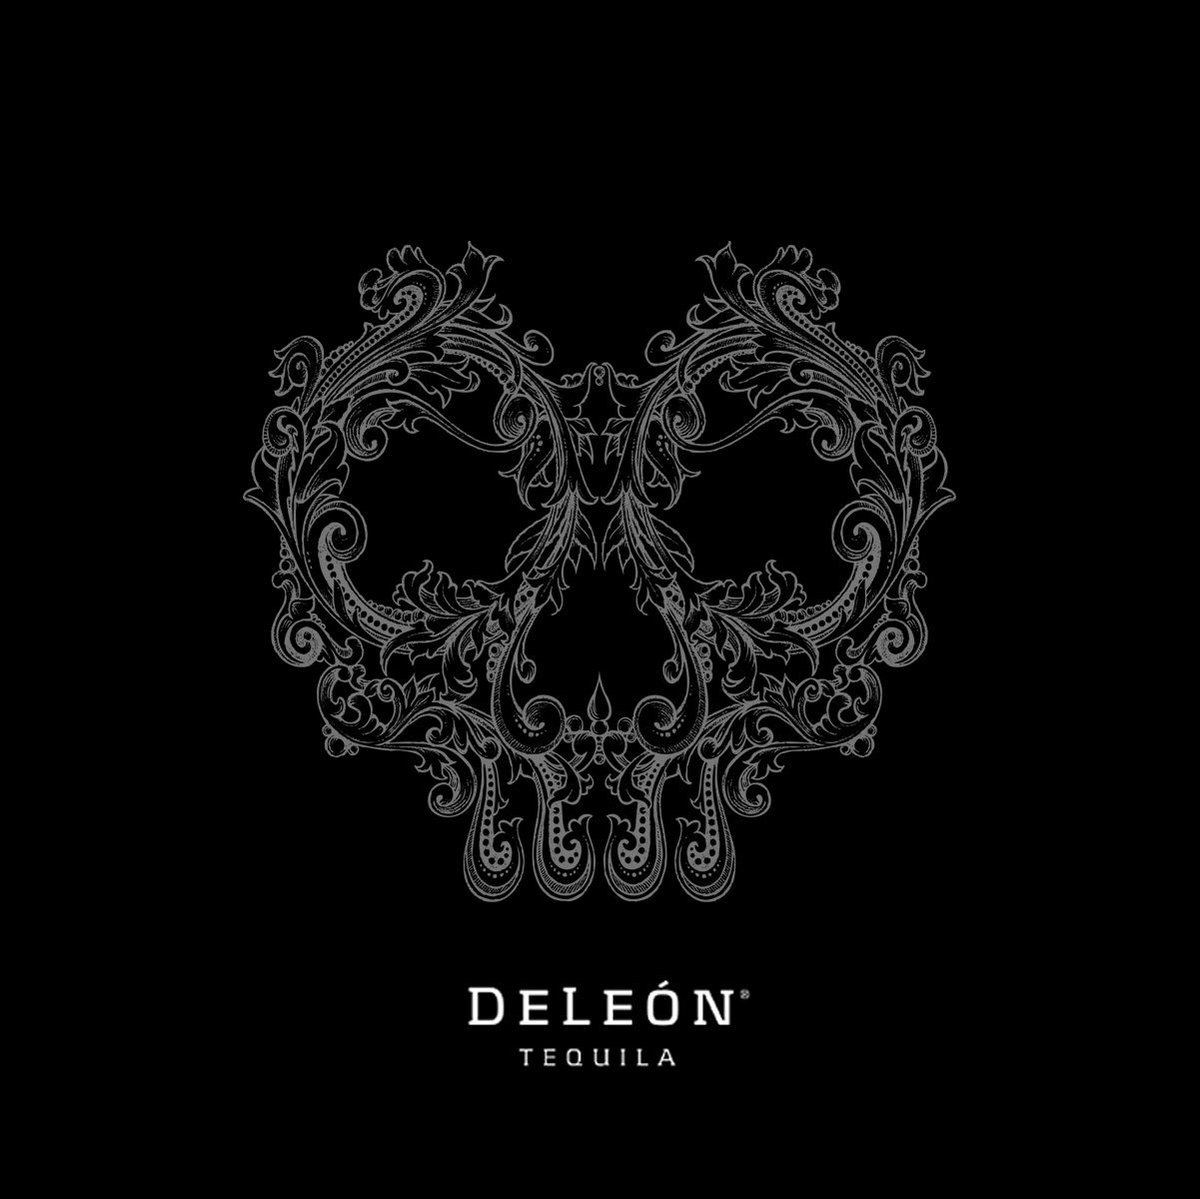 Shout out to everyone celebrating #DiaDeLosMuertos on #TheNextLevel!!! Let's GO! @DeLeonTequila https://t.co/AEfH47W3iT